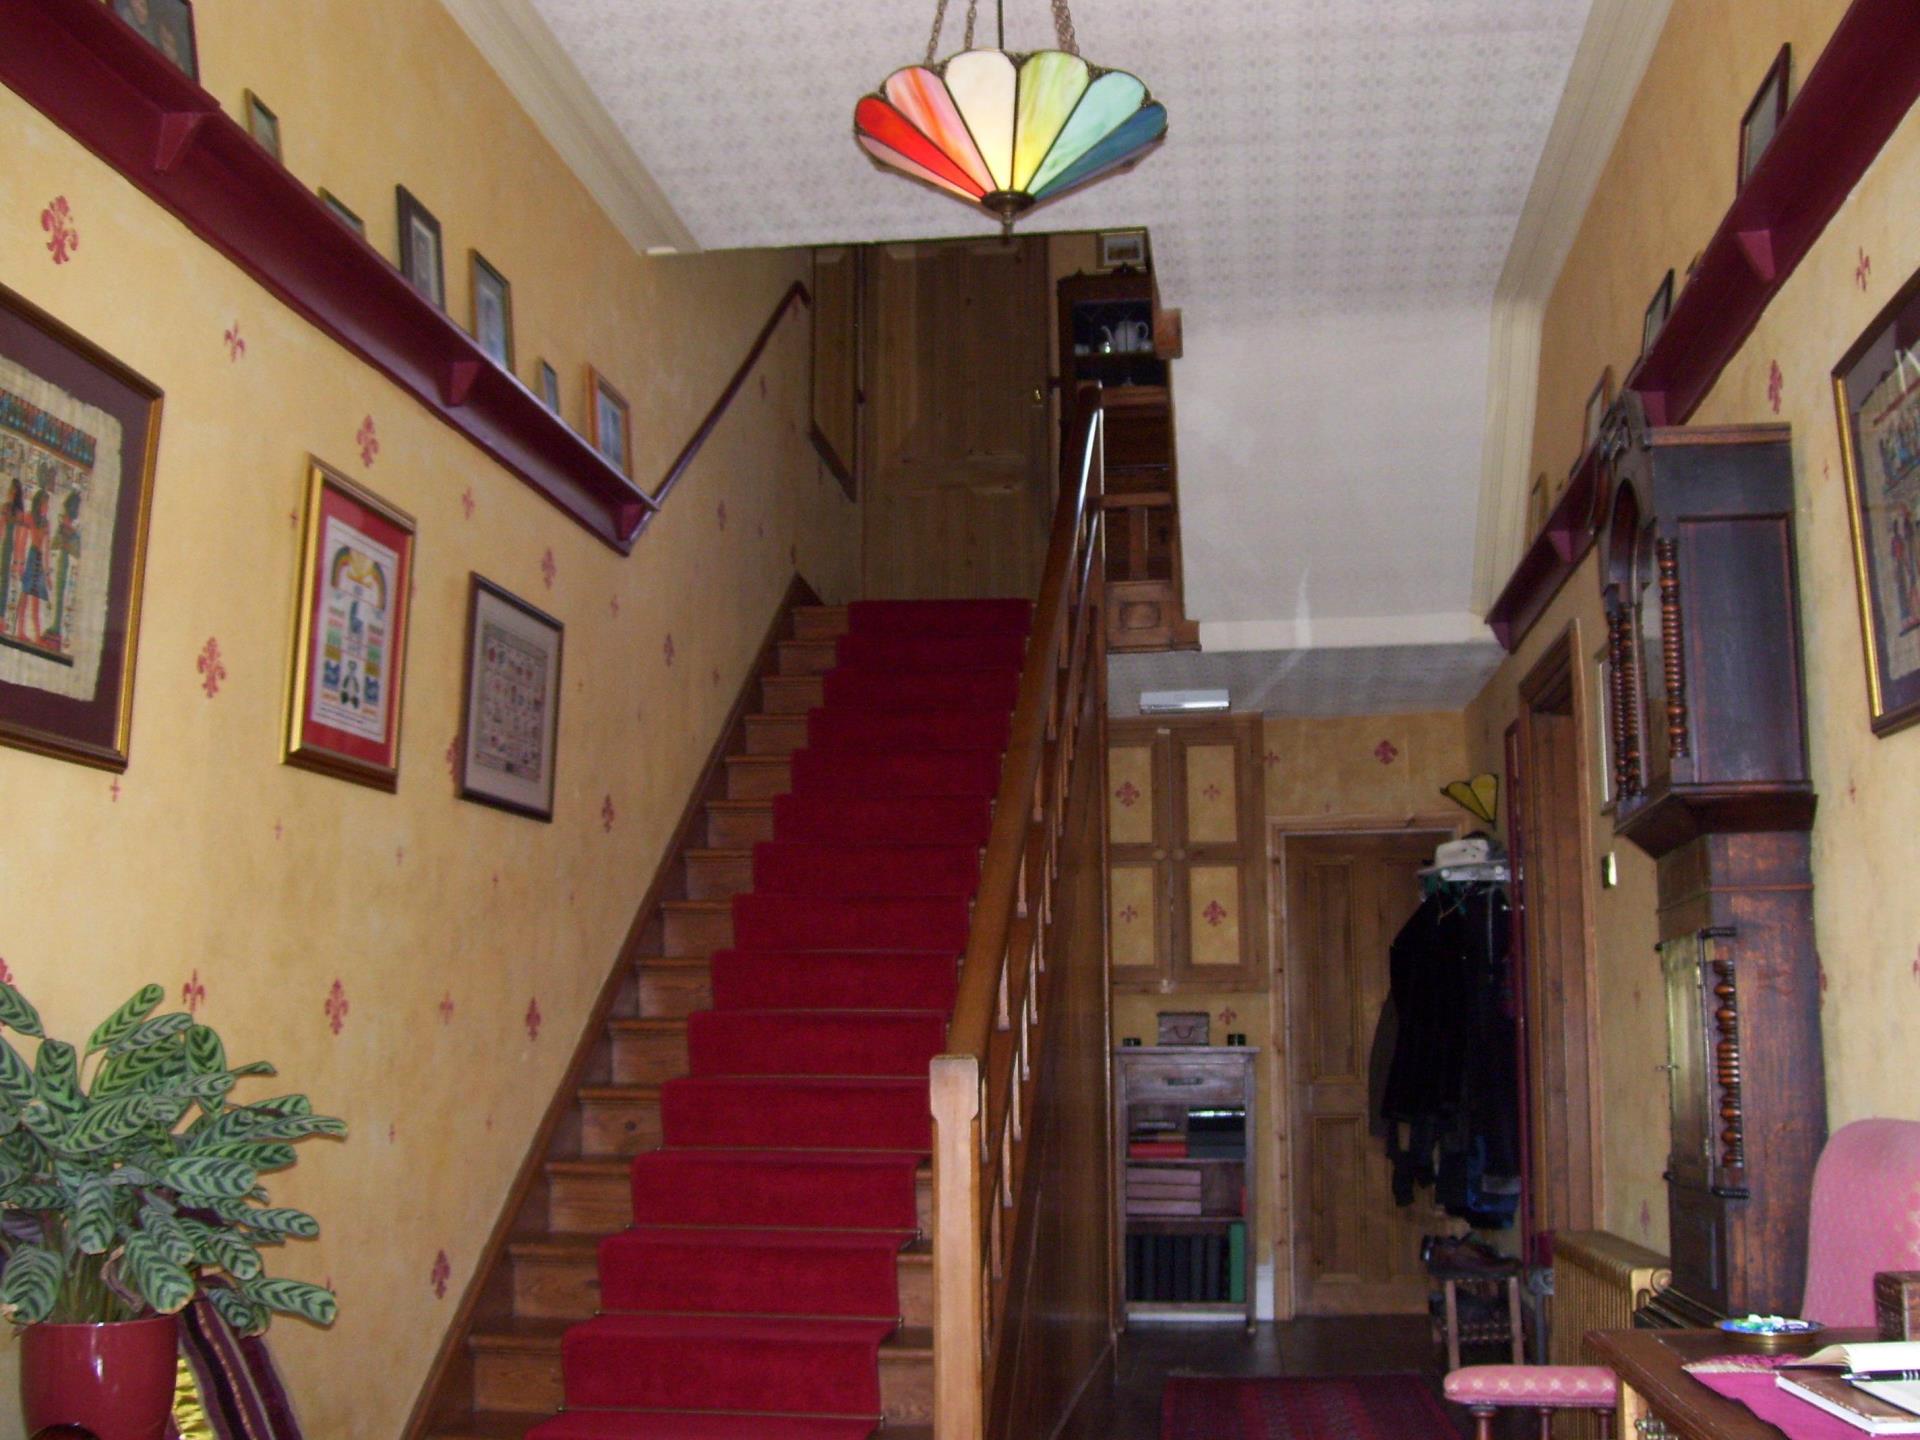 The Hall & Stairs